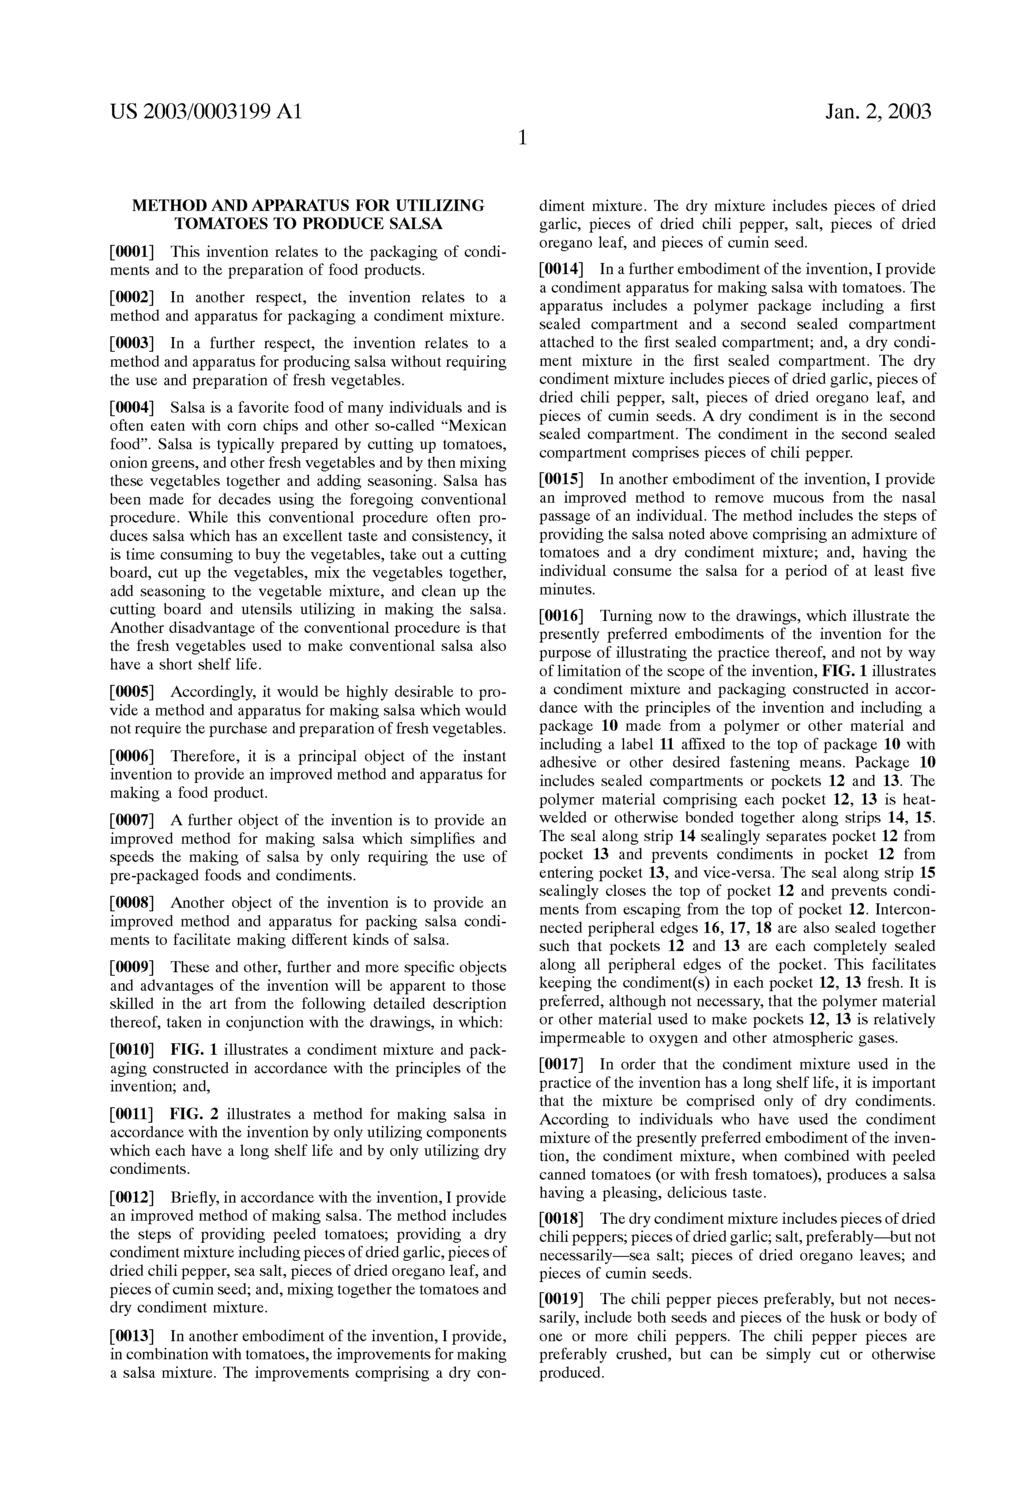 US 2003/0003199 A1 Jan. 2, 2003 METHOD AND APPARATUS FOR UTILIZING TOMATOES TO PRODUCE SALSA 0001. This invention relates to the packaging of condi ments and to the preparation of food products. 0002.